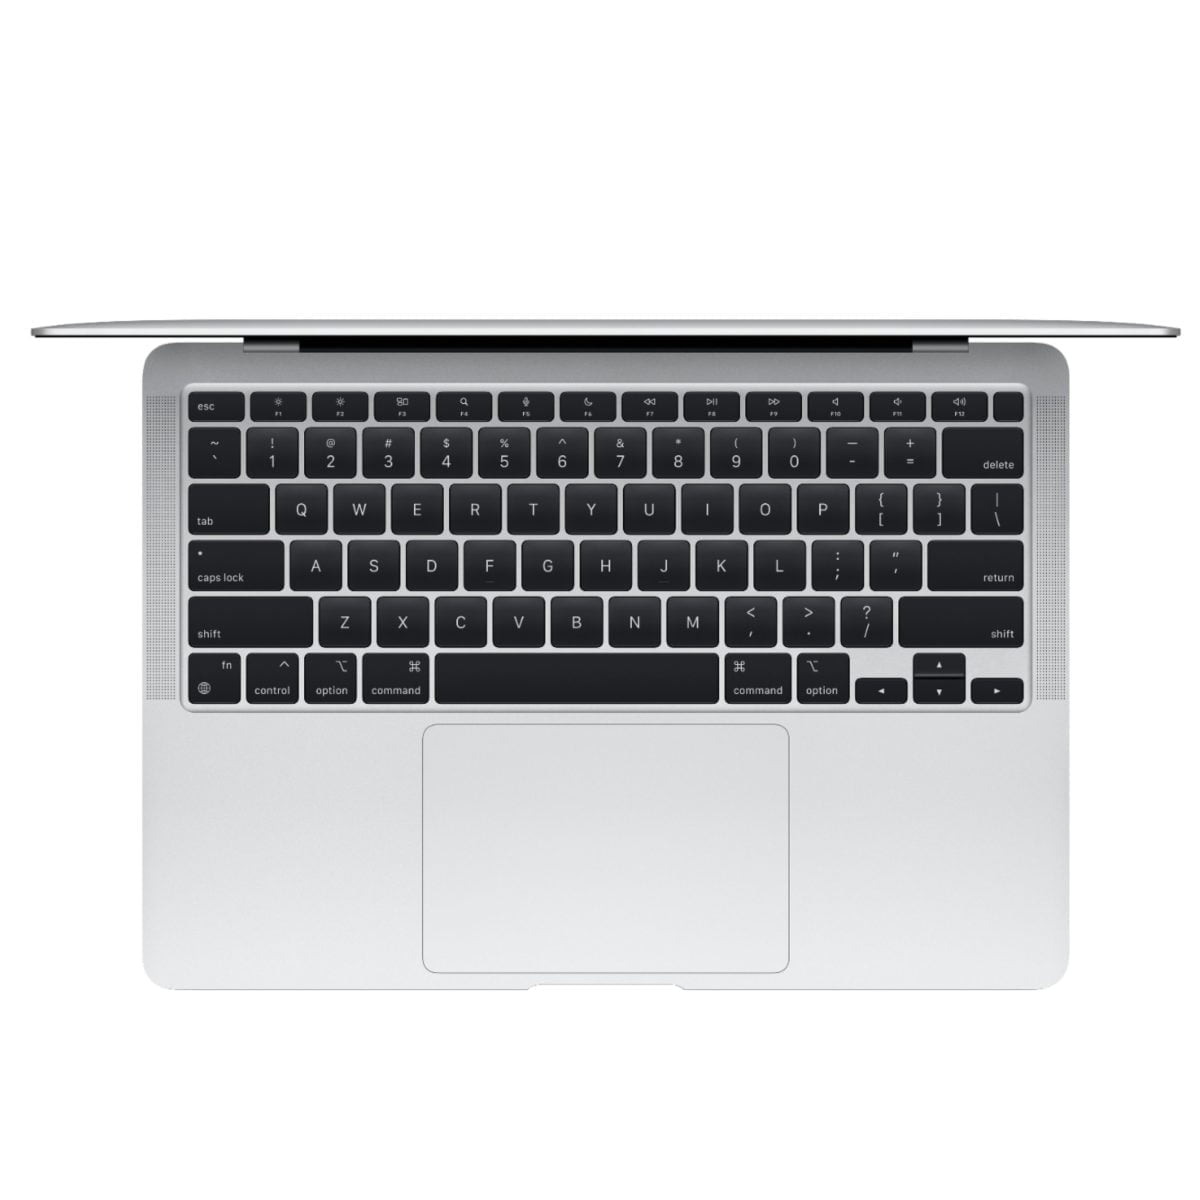 6418597Cv11D Scaled Apple &Lt;H1 Class=&Quot;Heading-5 V-Fw-Regular&Quot;&Gt;Macbook Air 13.3&Quot; Laptop - Apple M1 Chip - 8Gb Memory - 256Gb Ssd (Latest Model) - Silver (English Keyboard)&Lt;/H1&Gt; Https://Www.youtube.com/Watch?V=Hs1Hols4Sd0 Apple’s Thinnest And Lightest Notebook Gets Supercharged With The Apple M1 Chip. Tackle Your Projects With The Blazing-Fast 8-Core Cpu. Take Graphics-Intensive Apps And Games To The Next Level With The 7-Core Gpu. And Accelerate Machine Learning Tasks With The 16-Core Neural Engine. All With A Silent, Fanless Design And The Longest Battery Life Ever — Up To 18 Hours. Macbook Air. Still Perfectly Portable. Just A Lot More Powerful. Apple Macbook Air 13 Apple Macbook Air 13&Quot; Laptop - Apple M1 Chip - 8Gb Memory - 256Gb Ssd (Mgn93 ) - Silver